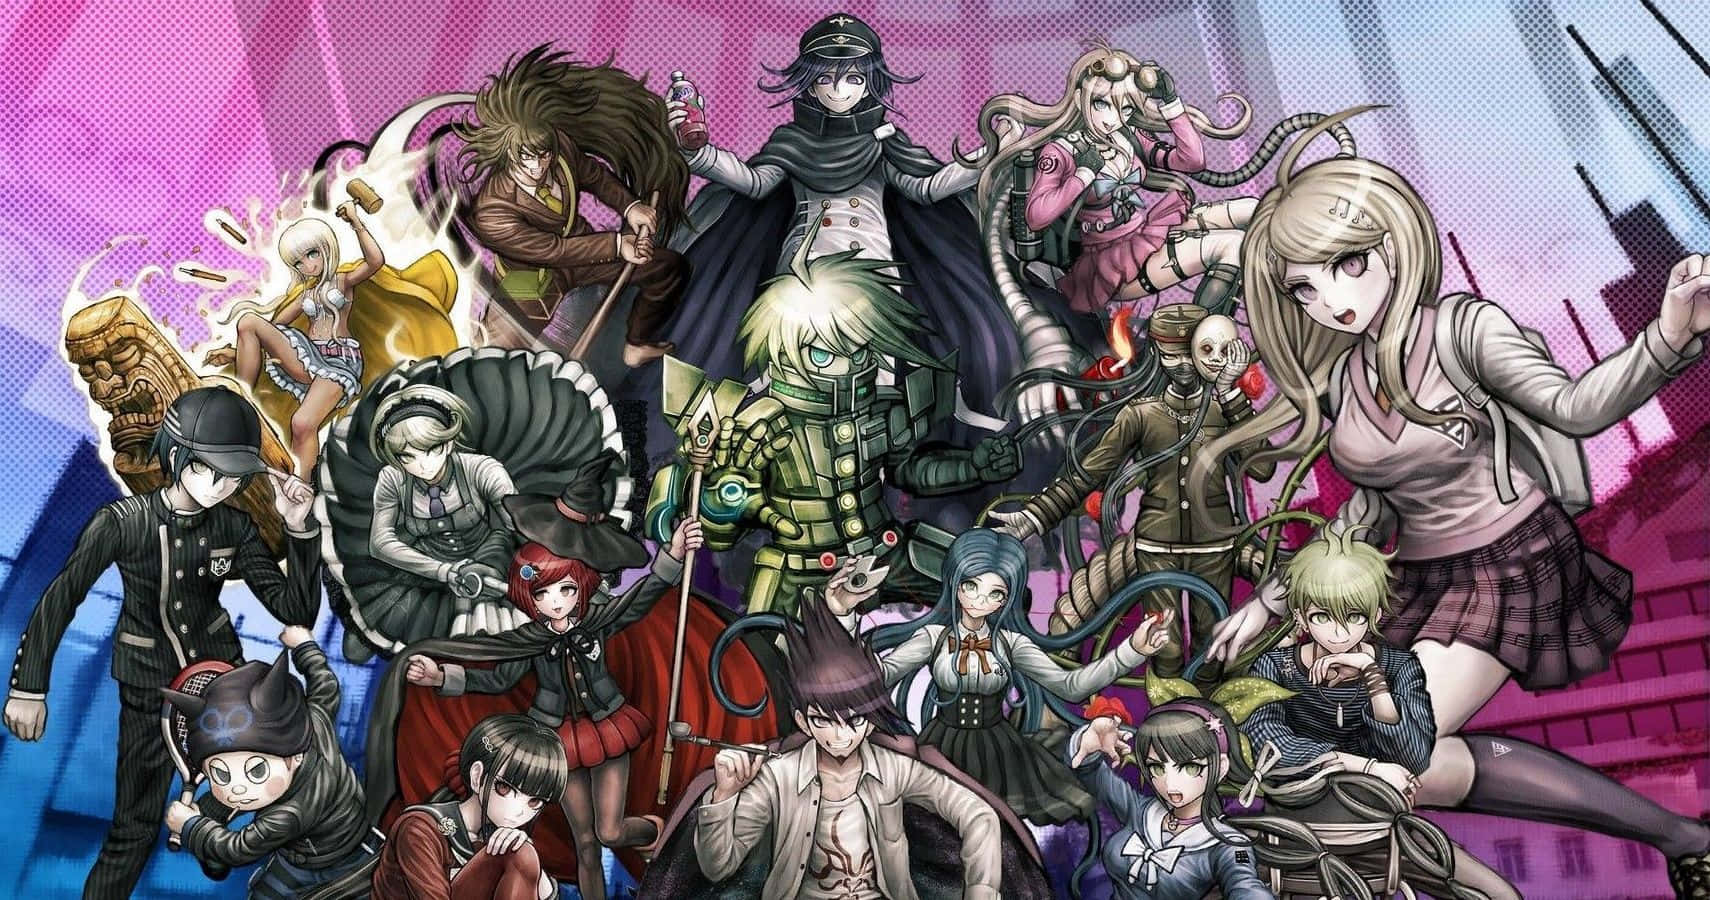 The despair of the 16 students in Danganronpa